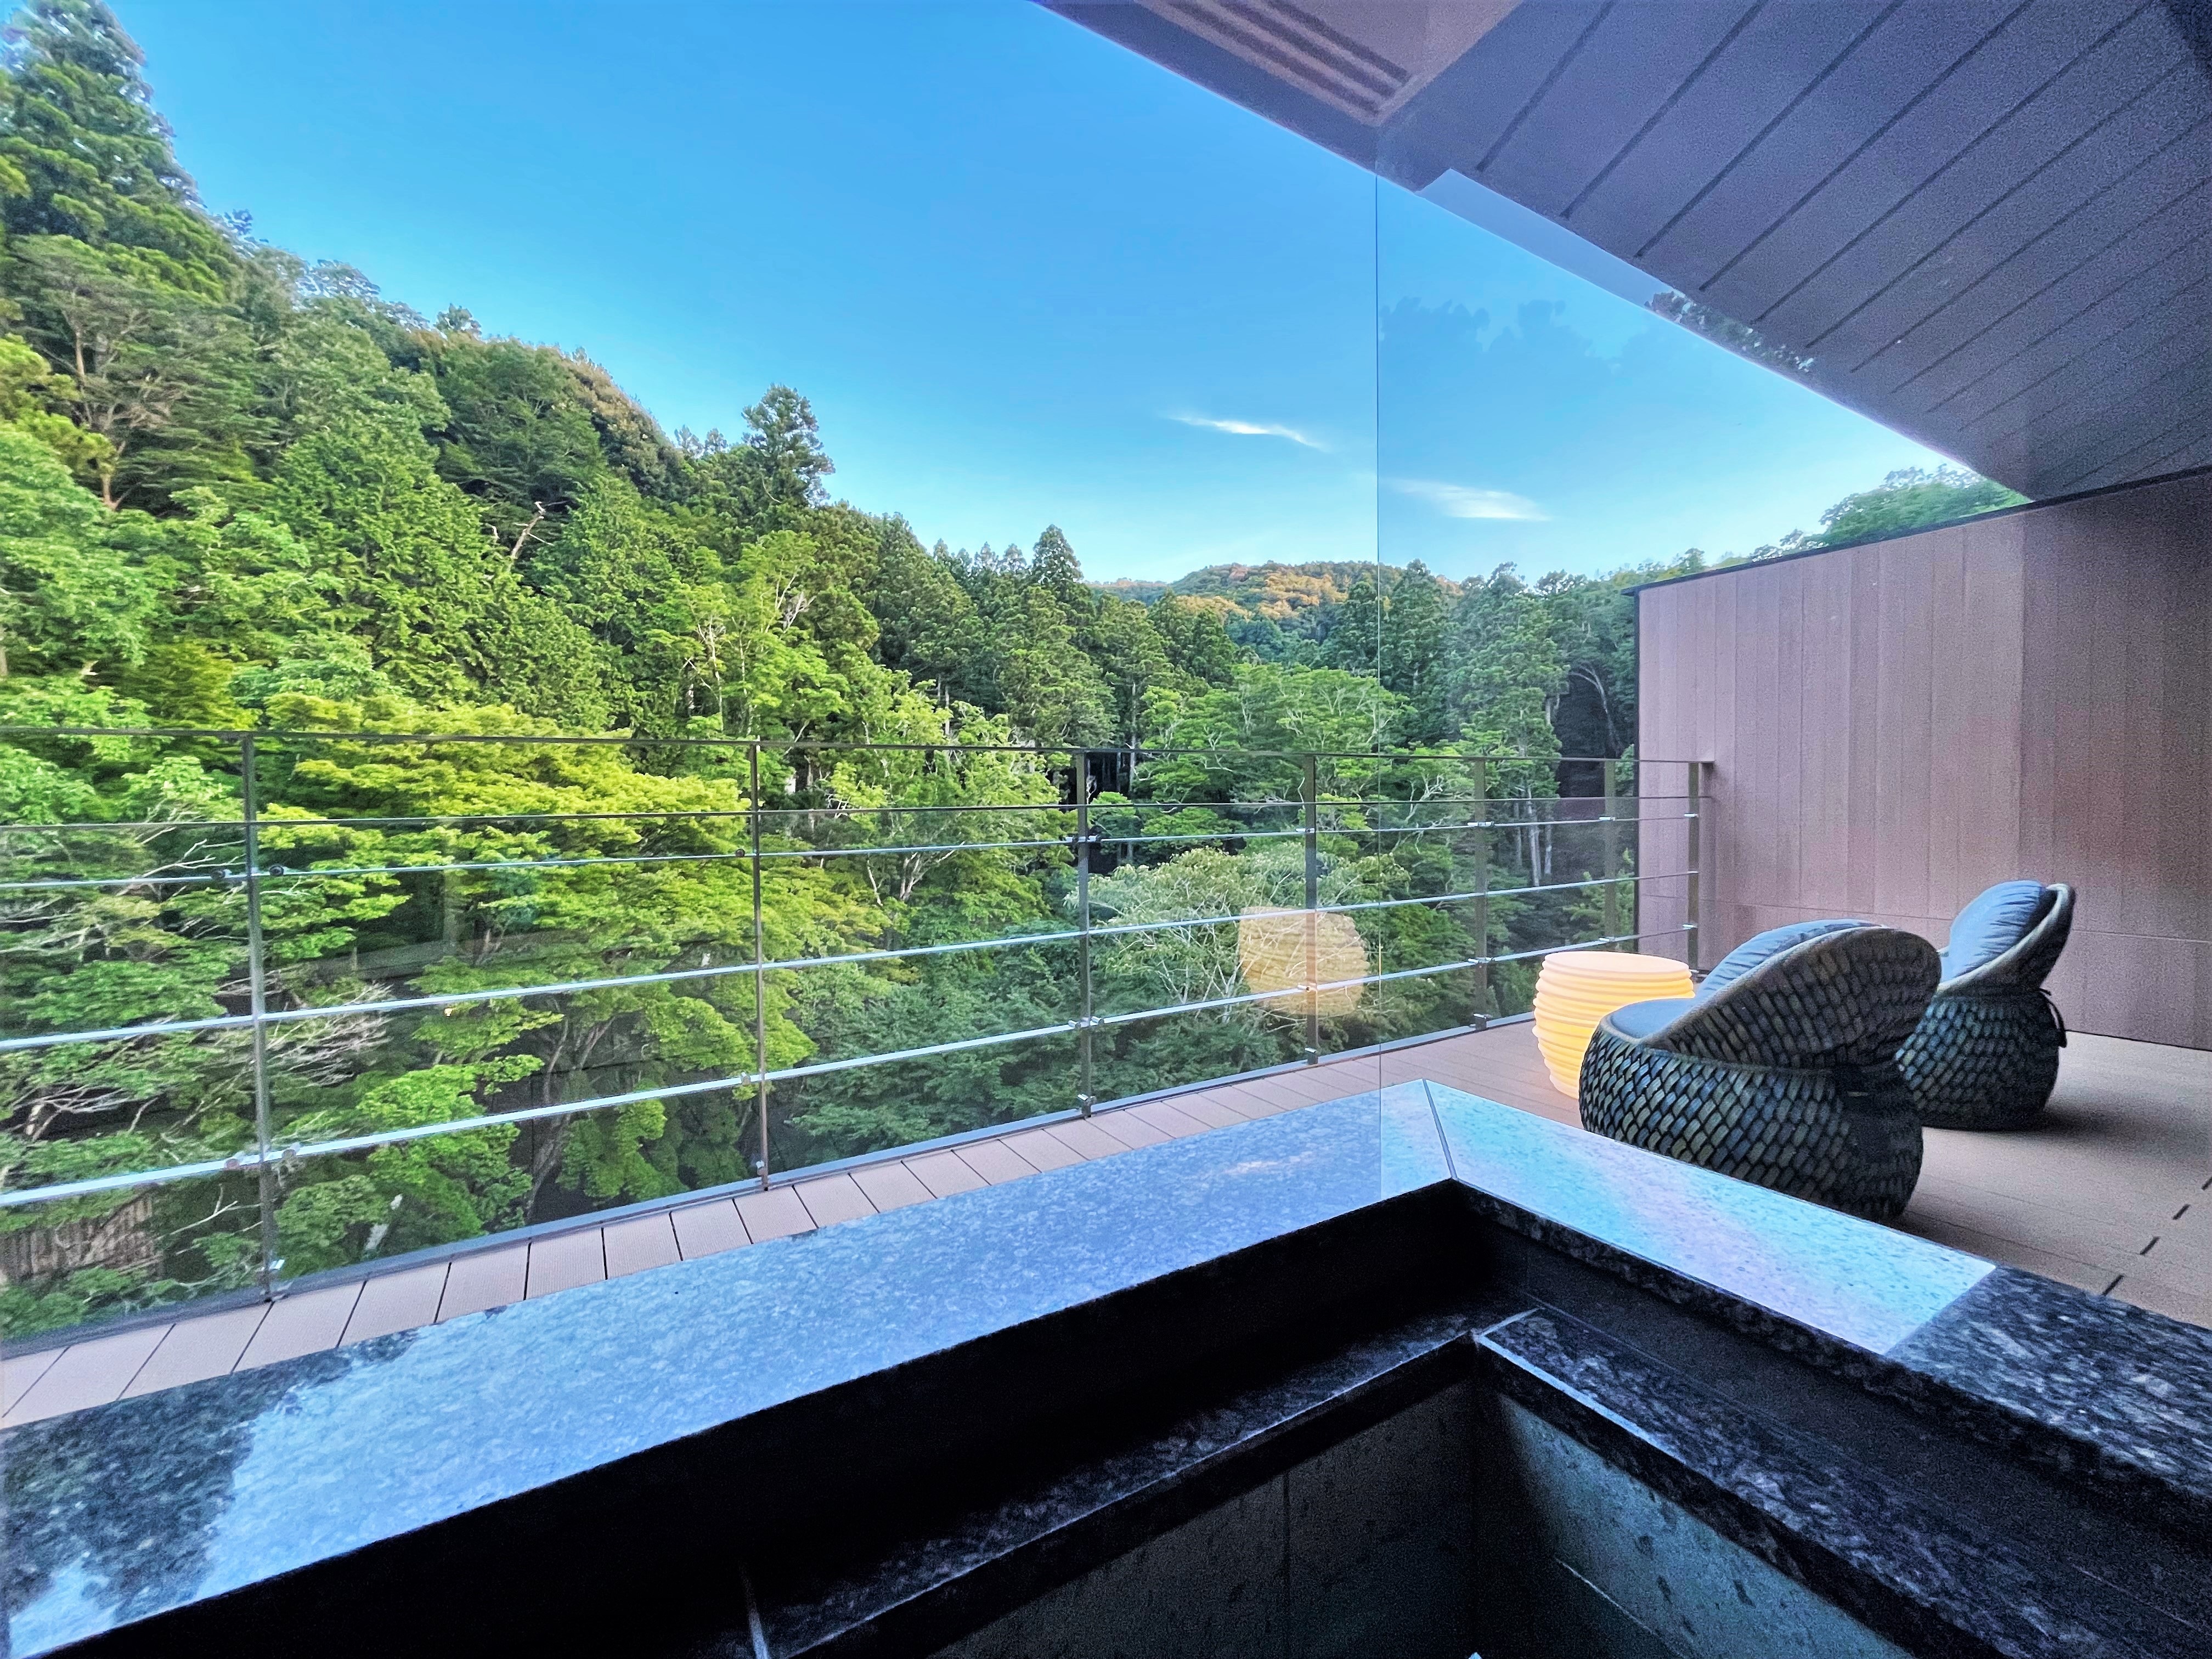 Semi-open-air hot spring & Japanese bed + guest room with terrace (view image from inside the bathroom)